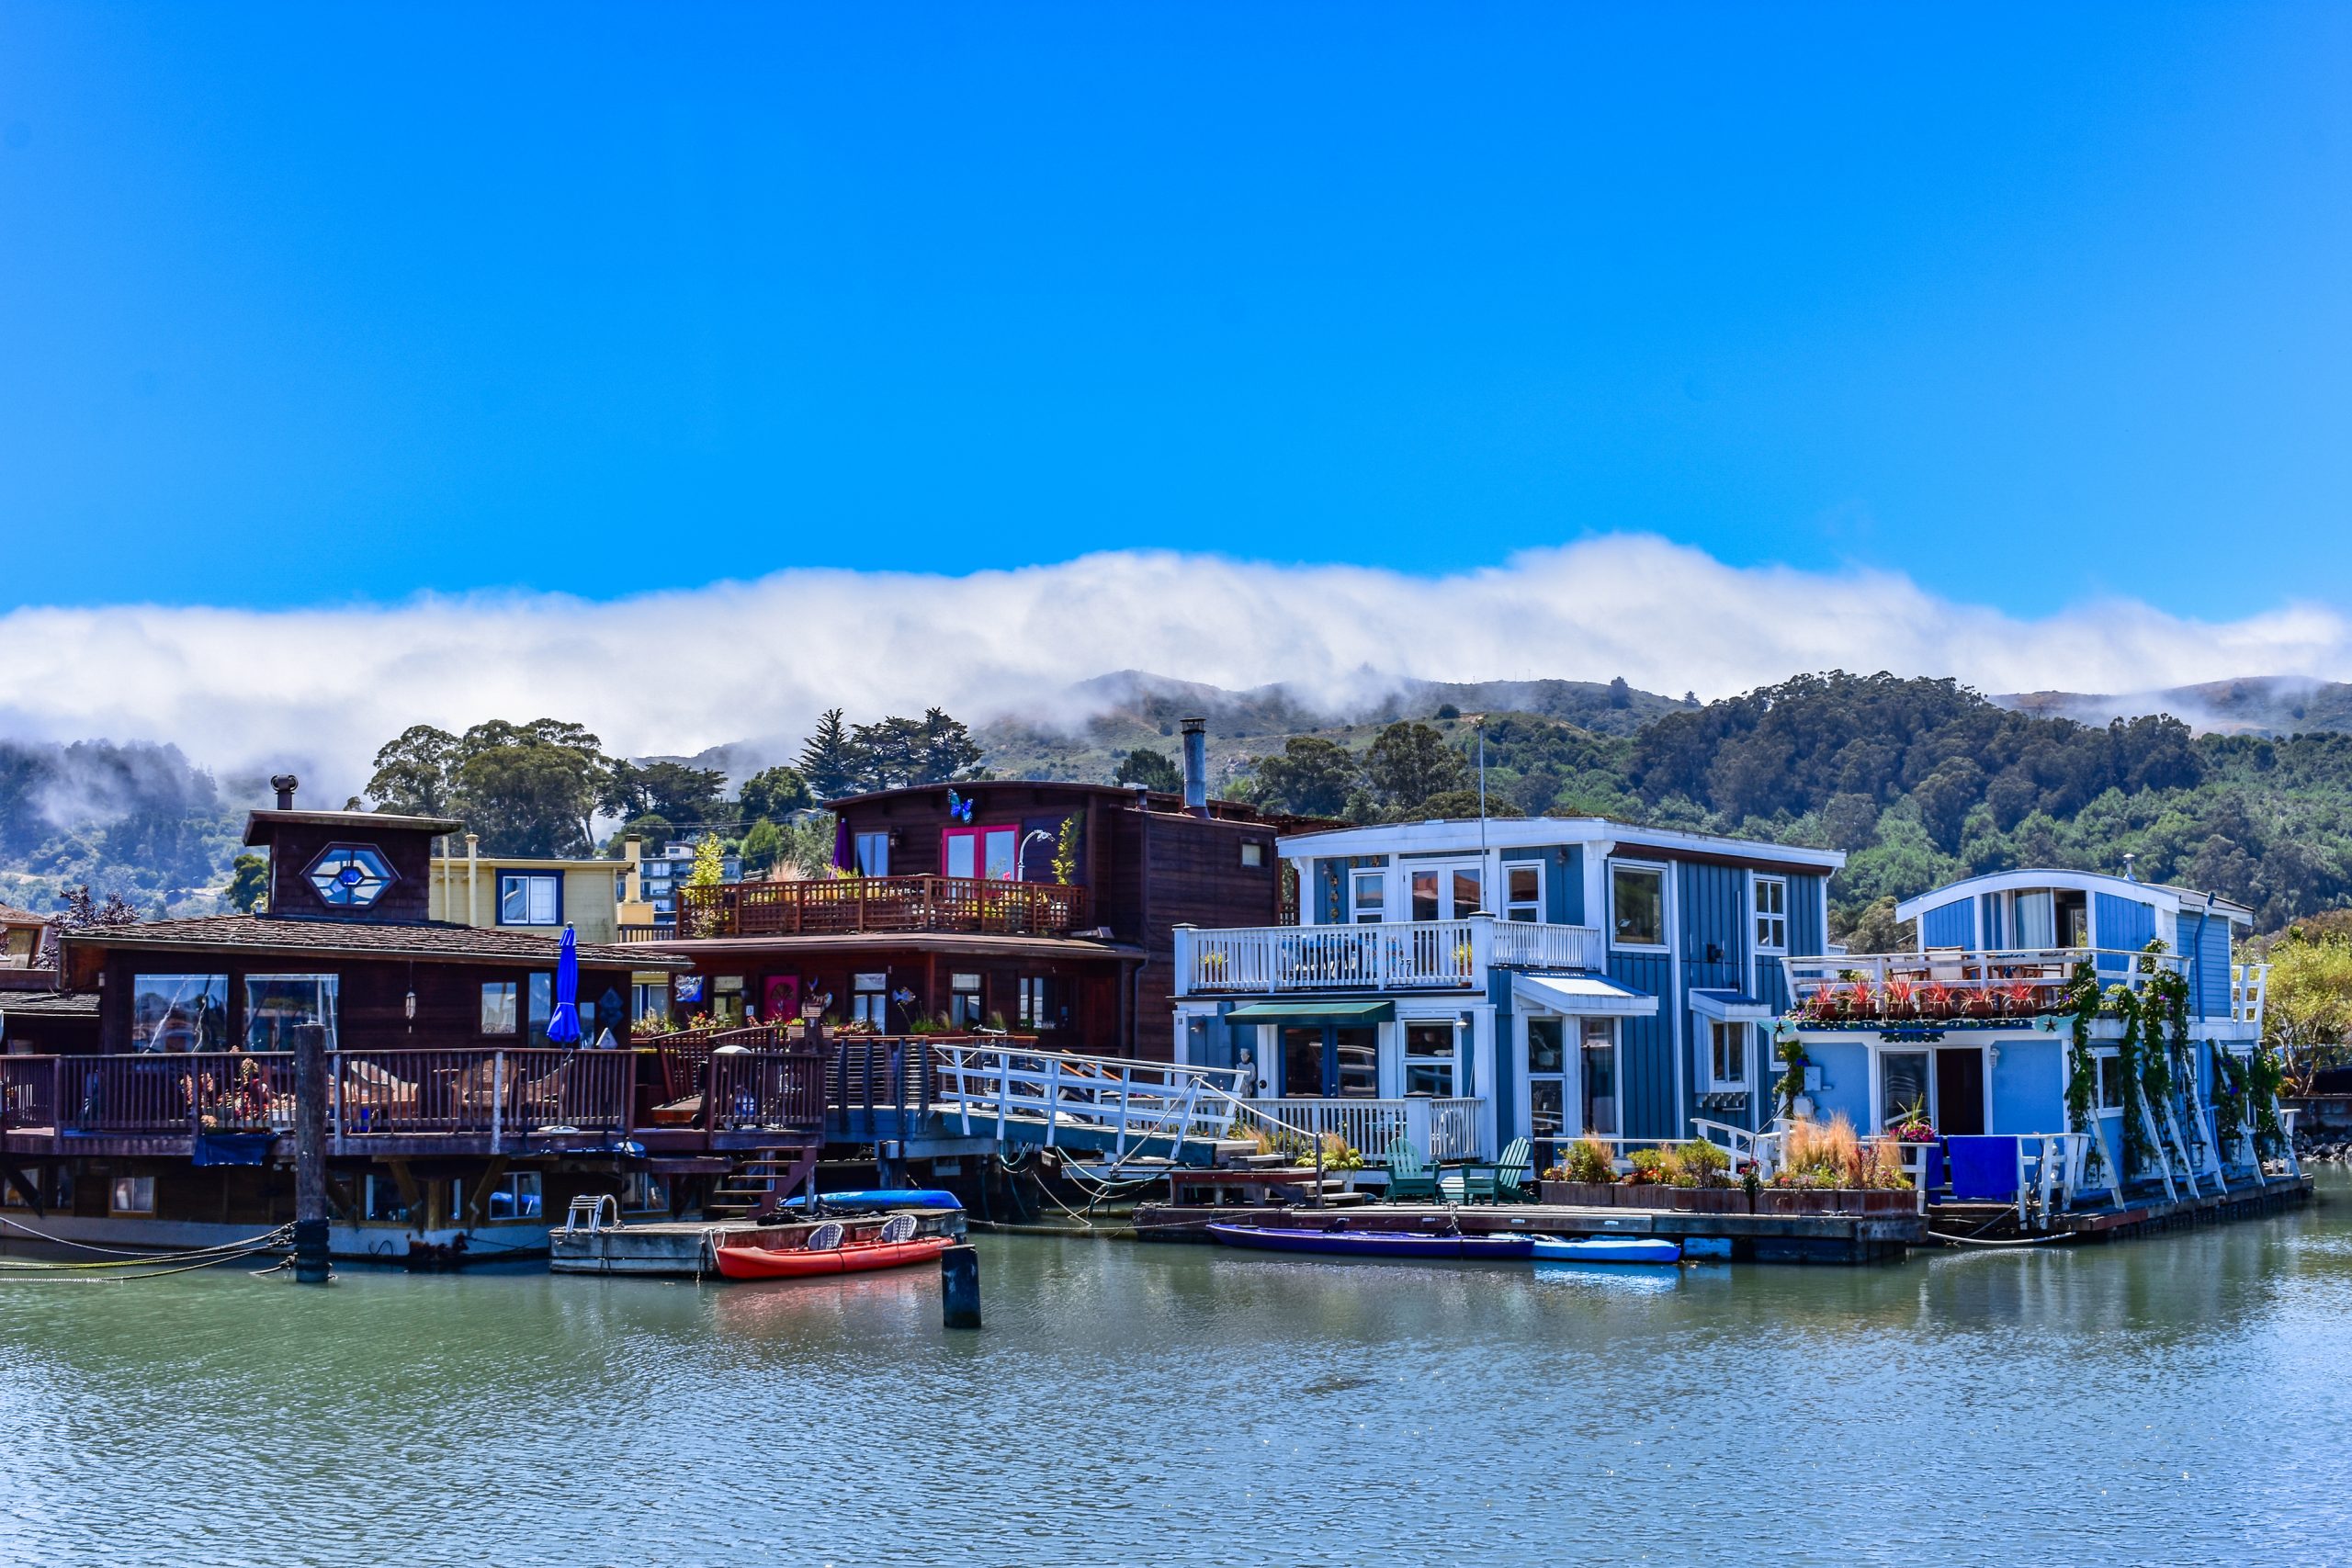 Several houseboats are pictured on the Sausalito waterfront.